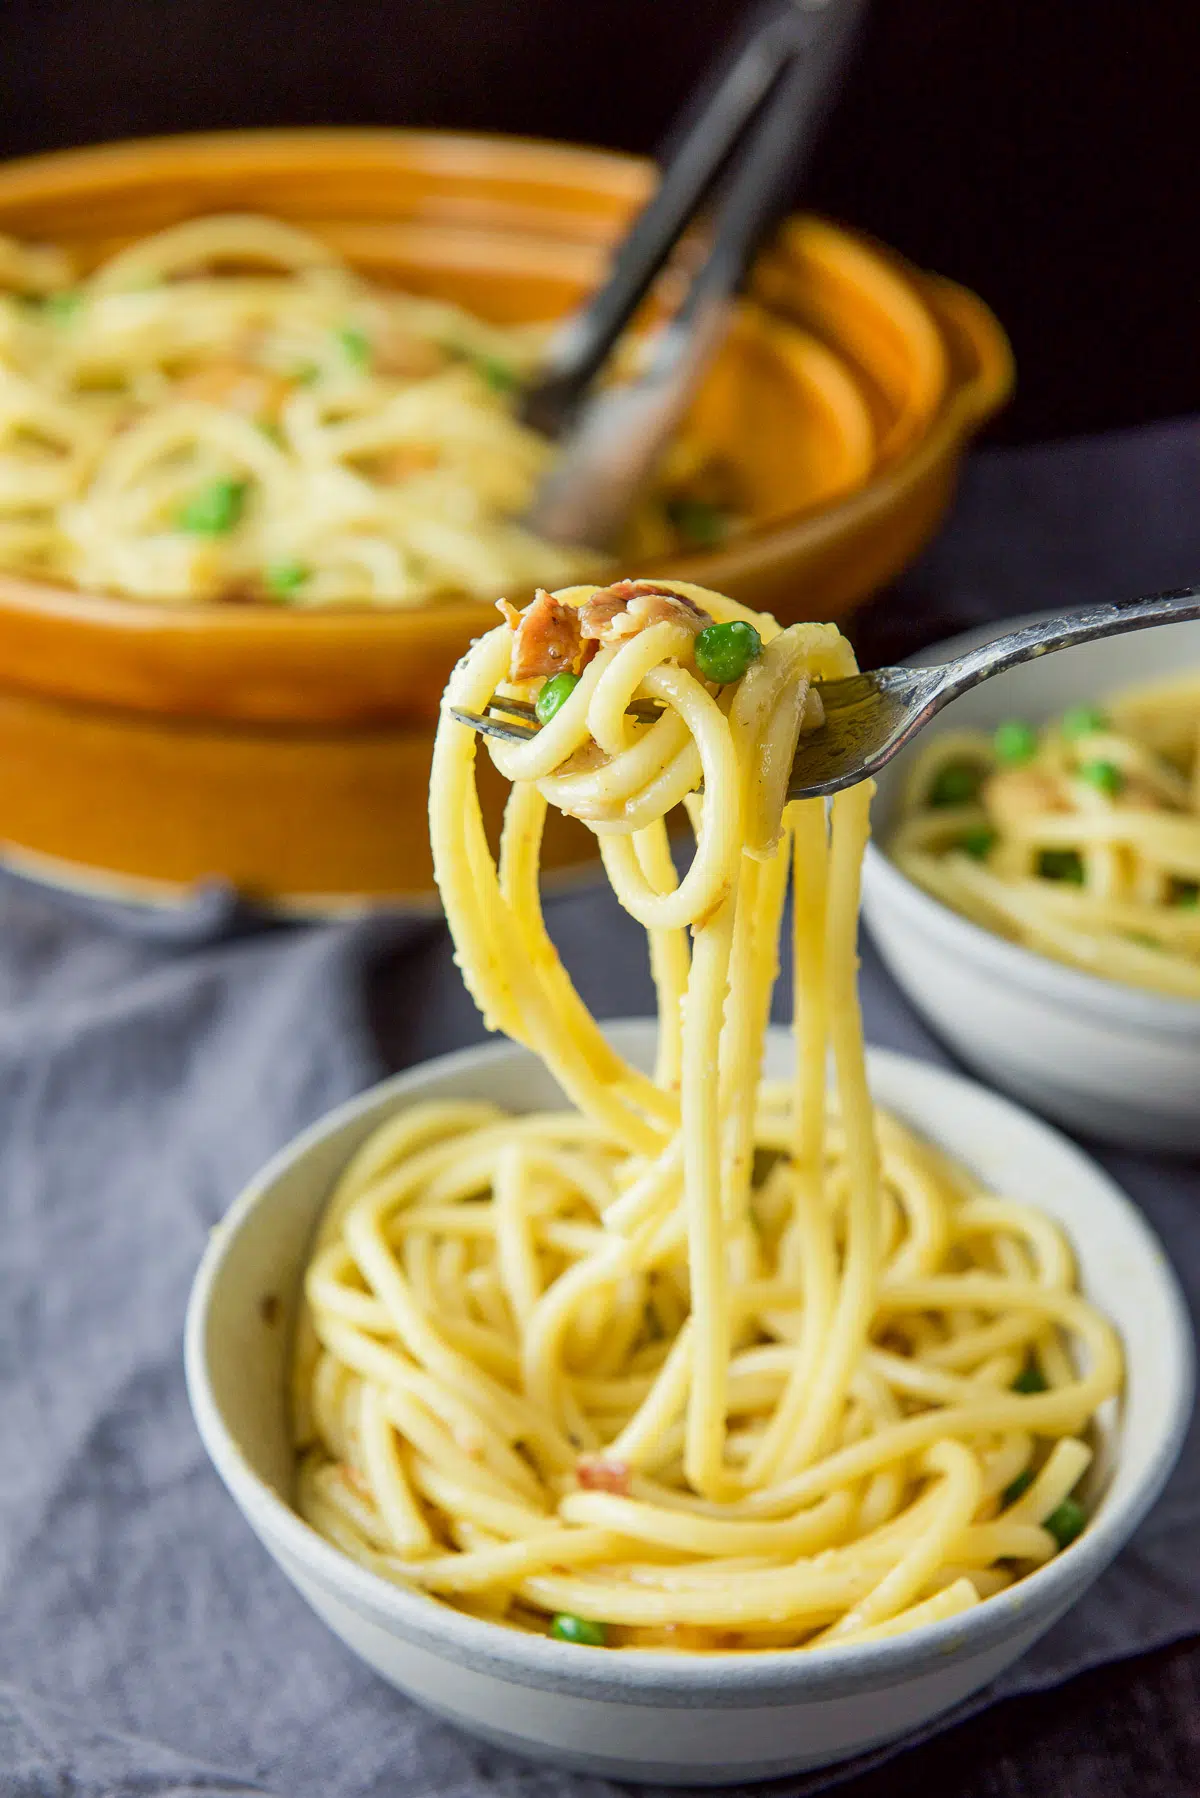 Forkful of carbonara held over the grey bowl with the brown serving bowl behind